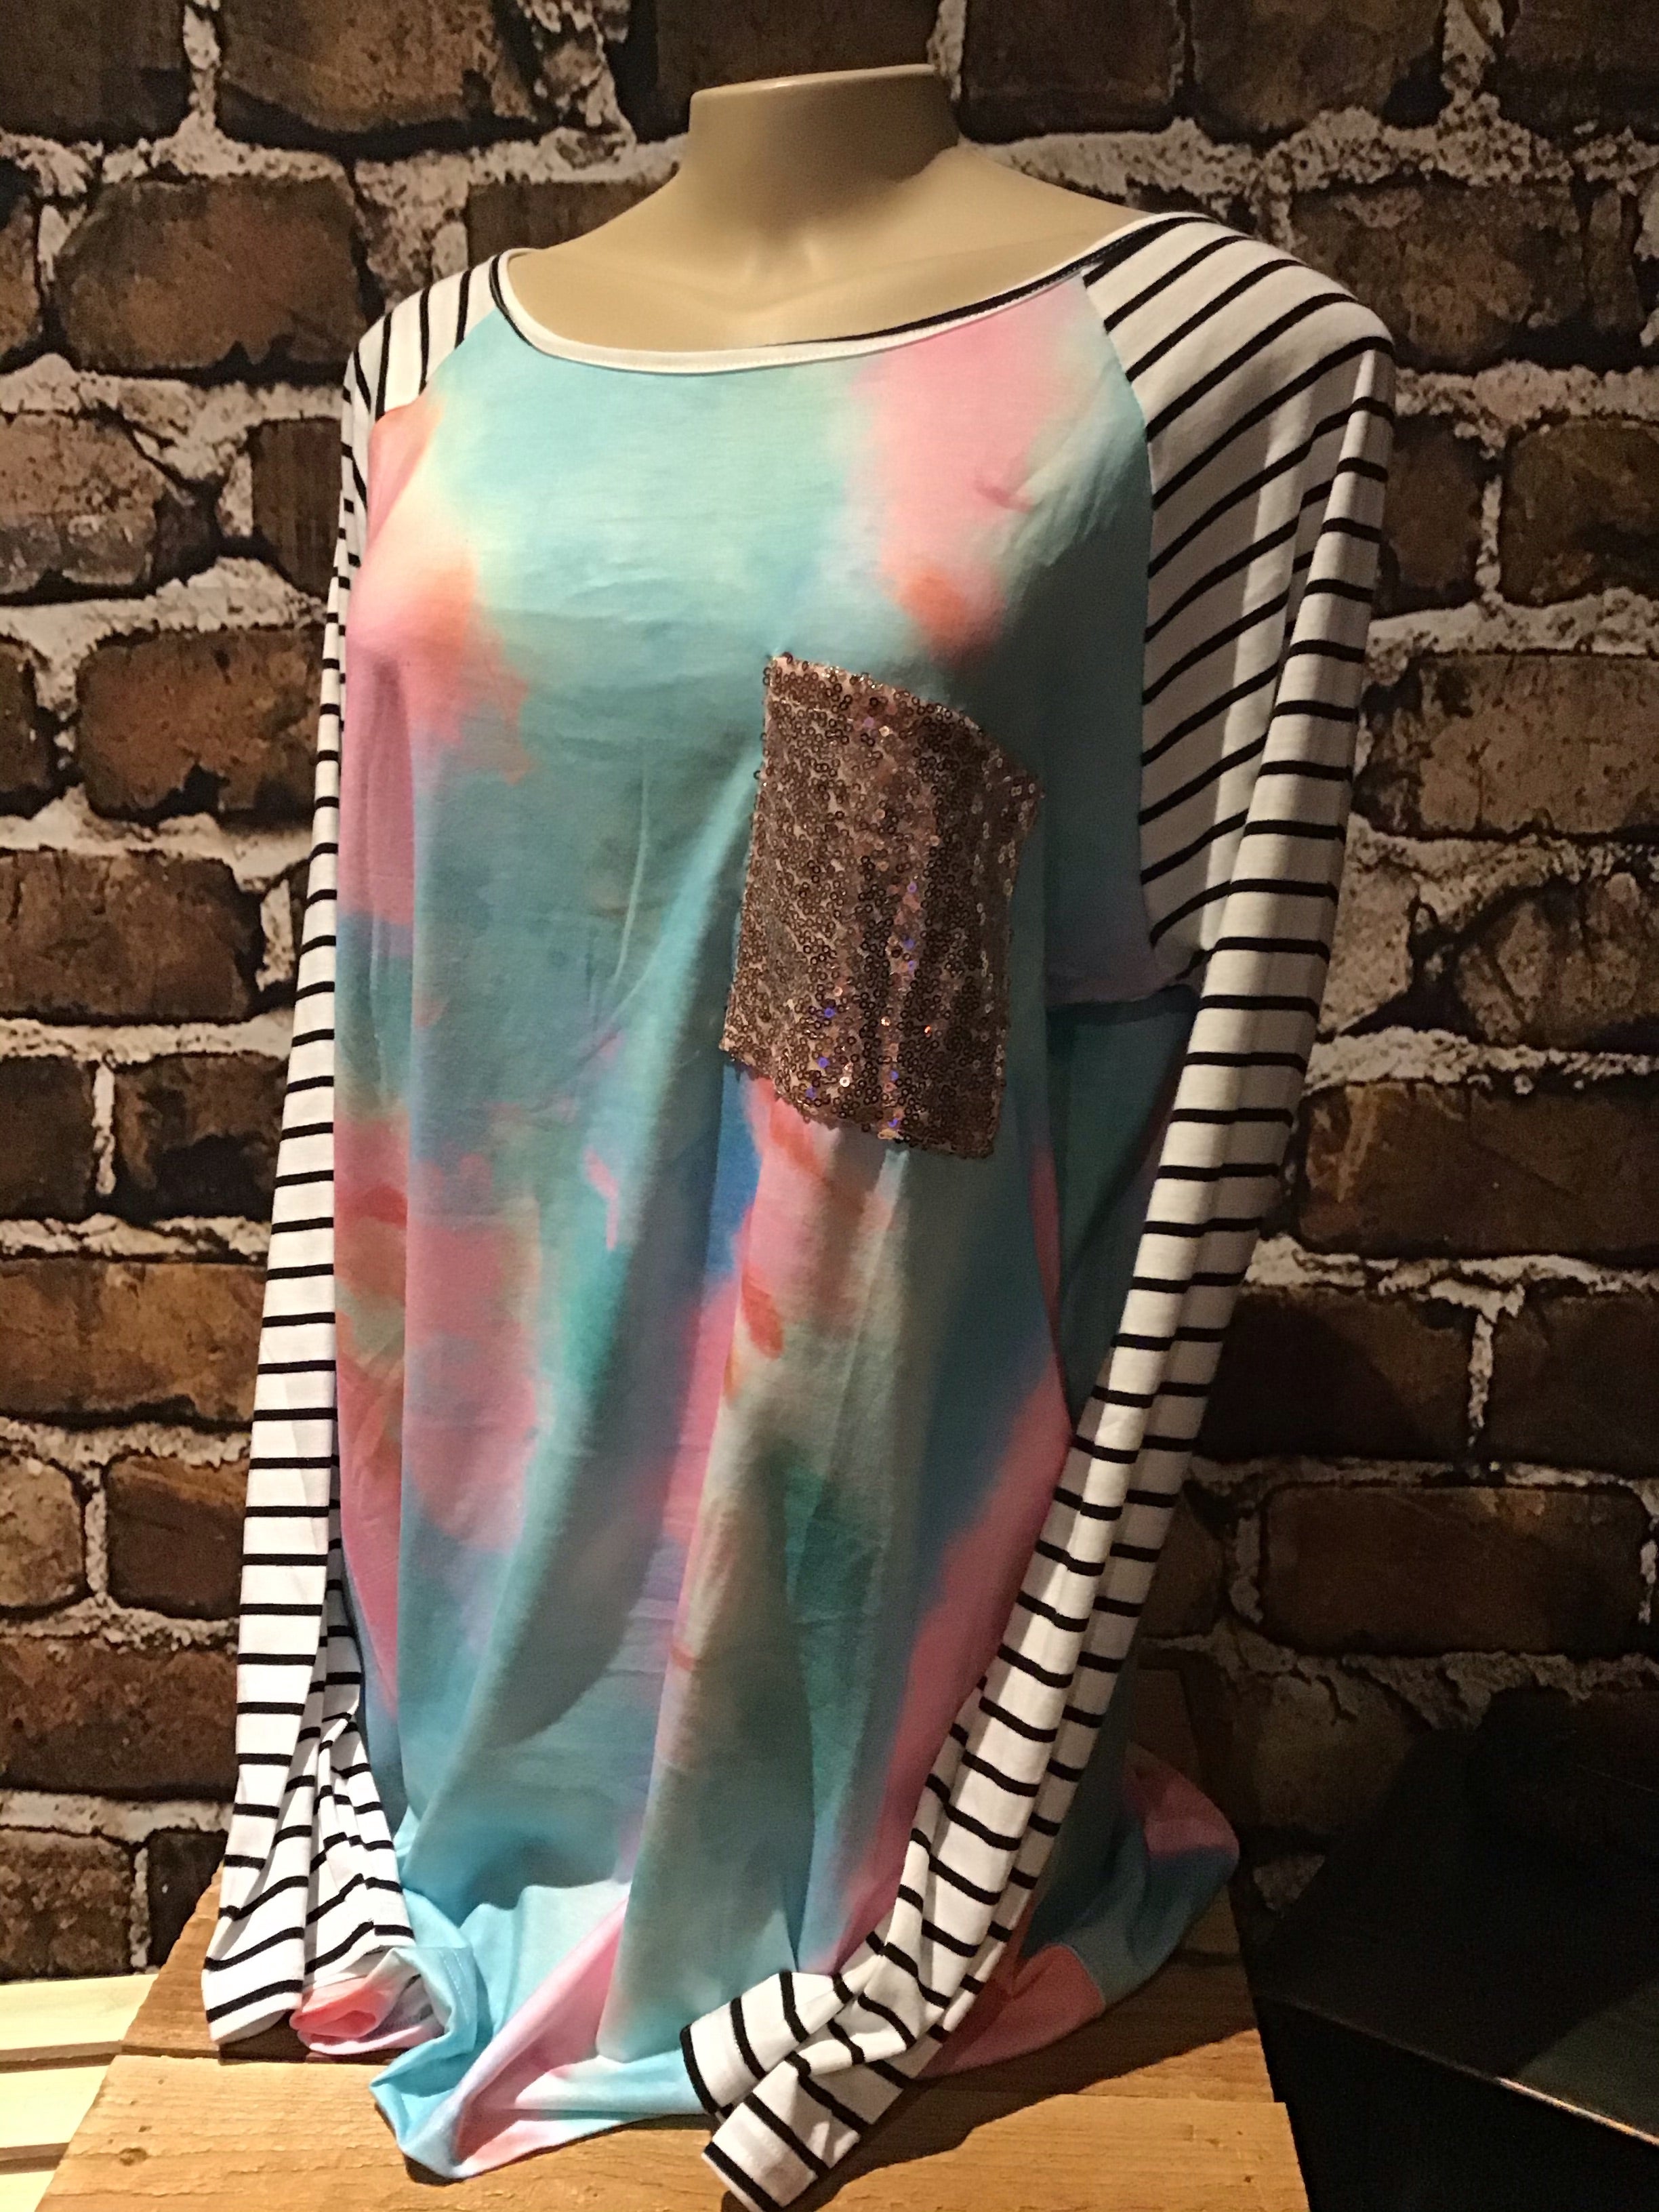 TIE DYE FRENCH TERRY  TOP WITH STRIPE RAGLAN SLEEVES AND SEQUINS FRONT PATCH POCKETWomen’s long sleeve tie dye sequence pocket Size Xlarge